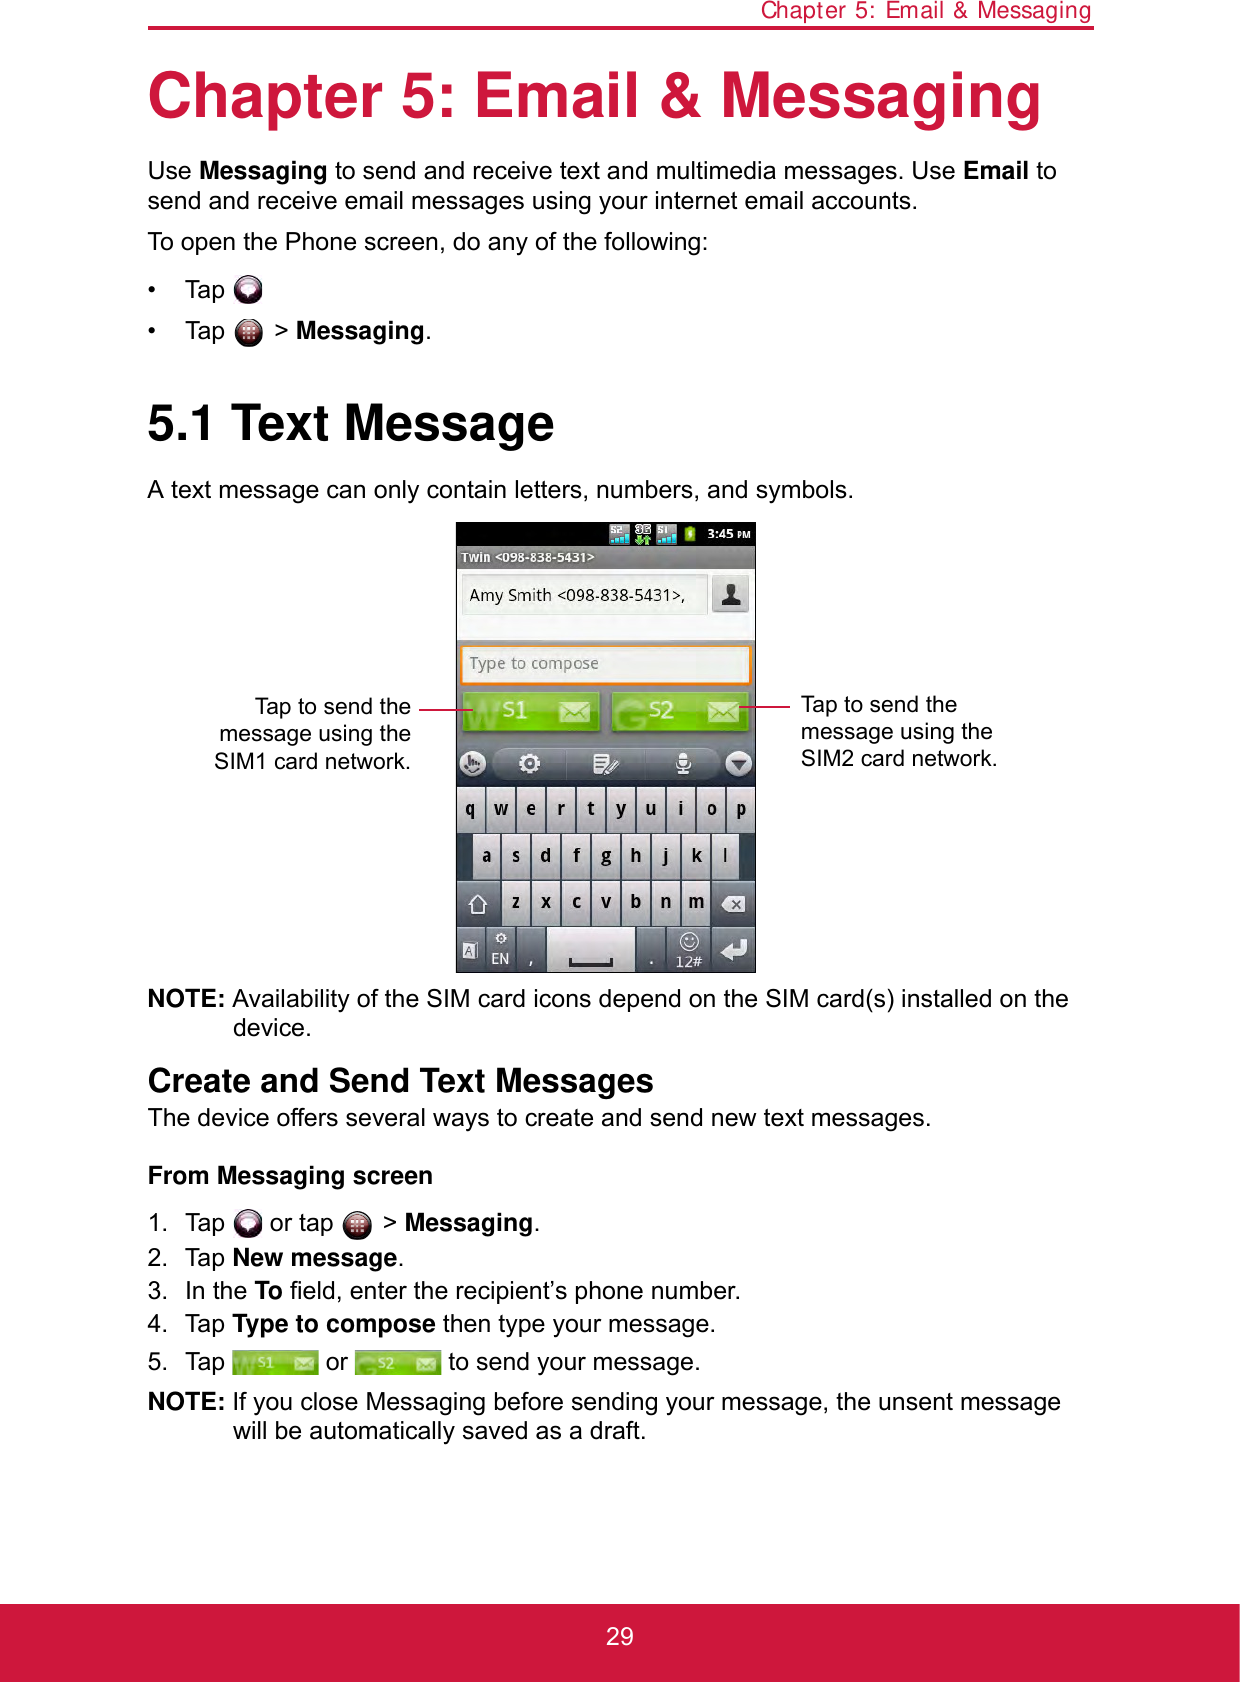 Chapter 5: Email &amp; Messaging29Chapter 5: Email &amp; MessagingUse Messaging to send and receive text and multimedia messages. Use Email to send and receive email messages using your internet email accounts.To open the Phone screen, do any of the following:• Tap .• Tap  &gt; Messaging.5.1 Text MessageA text message can only contain letters, numbers, and symbols.NOTE: Availability of the SIM card icons depend on the SIM card(s) installed on the device.Create and Send Text MessagesThe device offers several ways to create and send new text messages.From Messaging screen1. Tap   or tap   &gt; Messaging.2. Tap New message.3. In the To field, enter the recipient’s phone number.4. Tap Type to compose then type your message.5. Tap   or   to send your message.NOTE: If you close Messaging before sending your message, the unsent message will be automatically saved as a draft.Tap to send themessage using theSIM1 card network.Tap to send the message using the SIM2 card network.